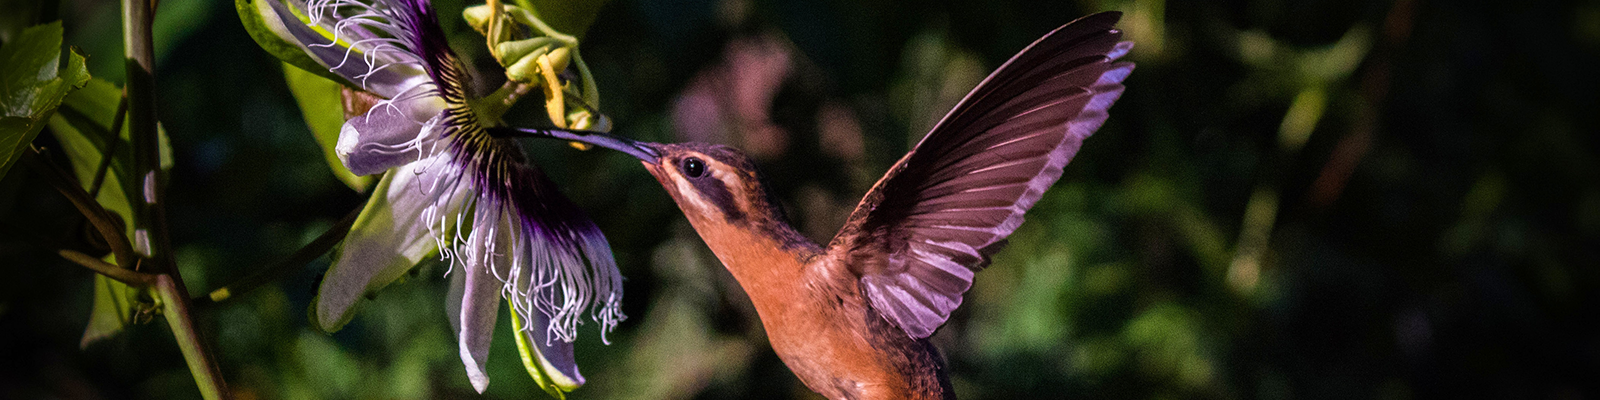 Photo from the First Photography Contest – PPGADR – Your Look on the Environment. Passion fruit’s flower’s humming bird. Raul M. C. dos Santos.  Brown colored humming bird flying and sucking néctar from a purple passion fruit flower.